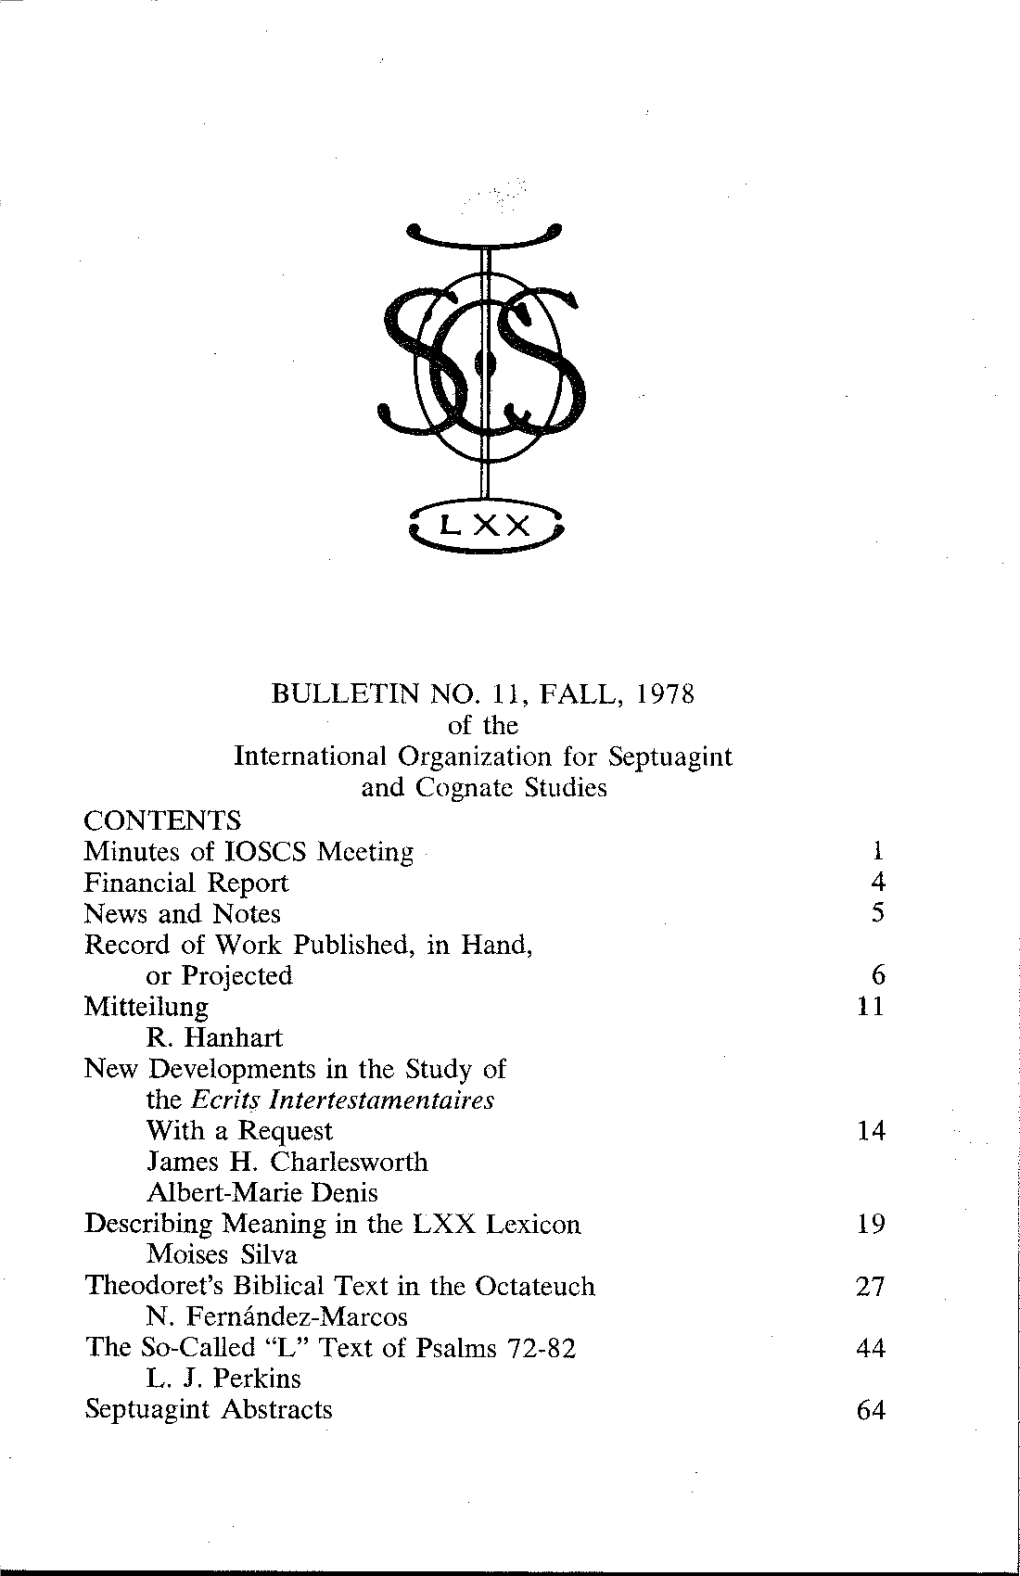 Bulletin of the International Organization for Septuagint And